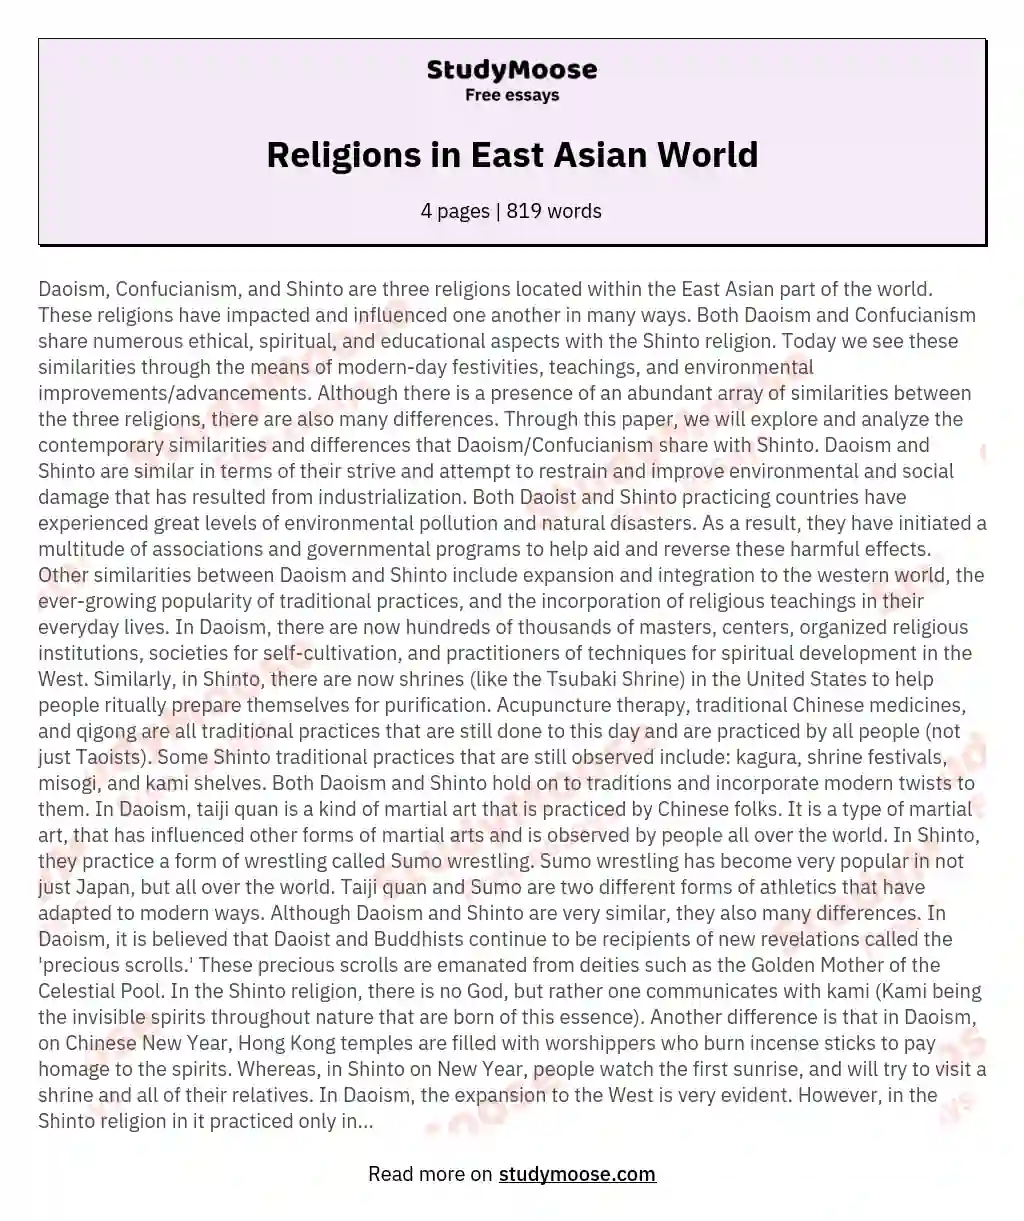 Religions in East Asian World essay